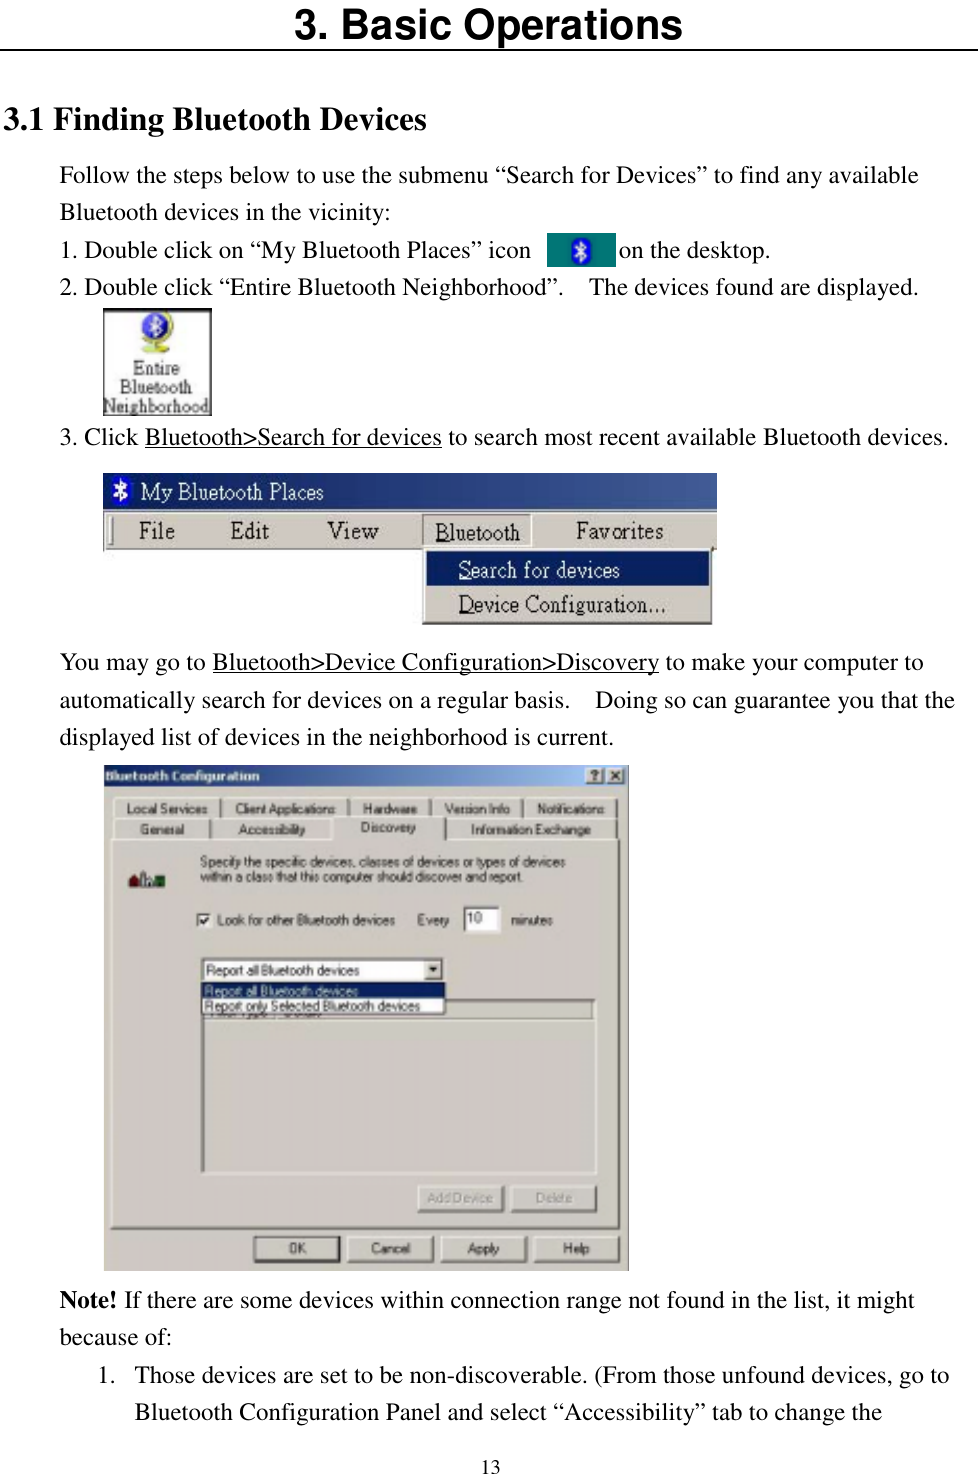 133. Basic Operations3.1 Finding Bluetooth DevicesFollow the steps below to use the submenu “Search for Devices” to find any availableBluetooth devices in the vicinity:1. Double click on “My Bluetooth Places” icon              on the desktop.2. Double click “Entire Bluetooth Neighborhood”.    The devices found are displayed.3. Click Bluetooth&gt;Search for devices to search most recent available Bluetooth devices.You may go to Bluetooth&gt;Device Configuration&gt;Discovery to make your computer toautomatically search for devices on a regular basis.    Doing so can guarantee you that thedisplayed list of devices in the neighborhood is current.Note! If there are some devices within connection range not found in the list, it mightbecause of:1. Those devices are set to be non-discoverable. (From those unfound devices, go toBluetooth Configuration Panel and select “Accessibility” tab to change the